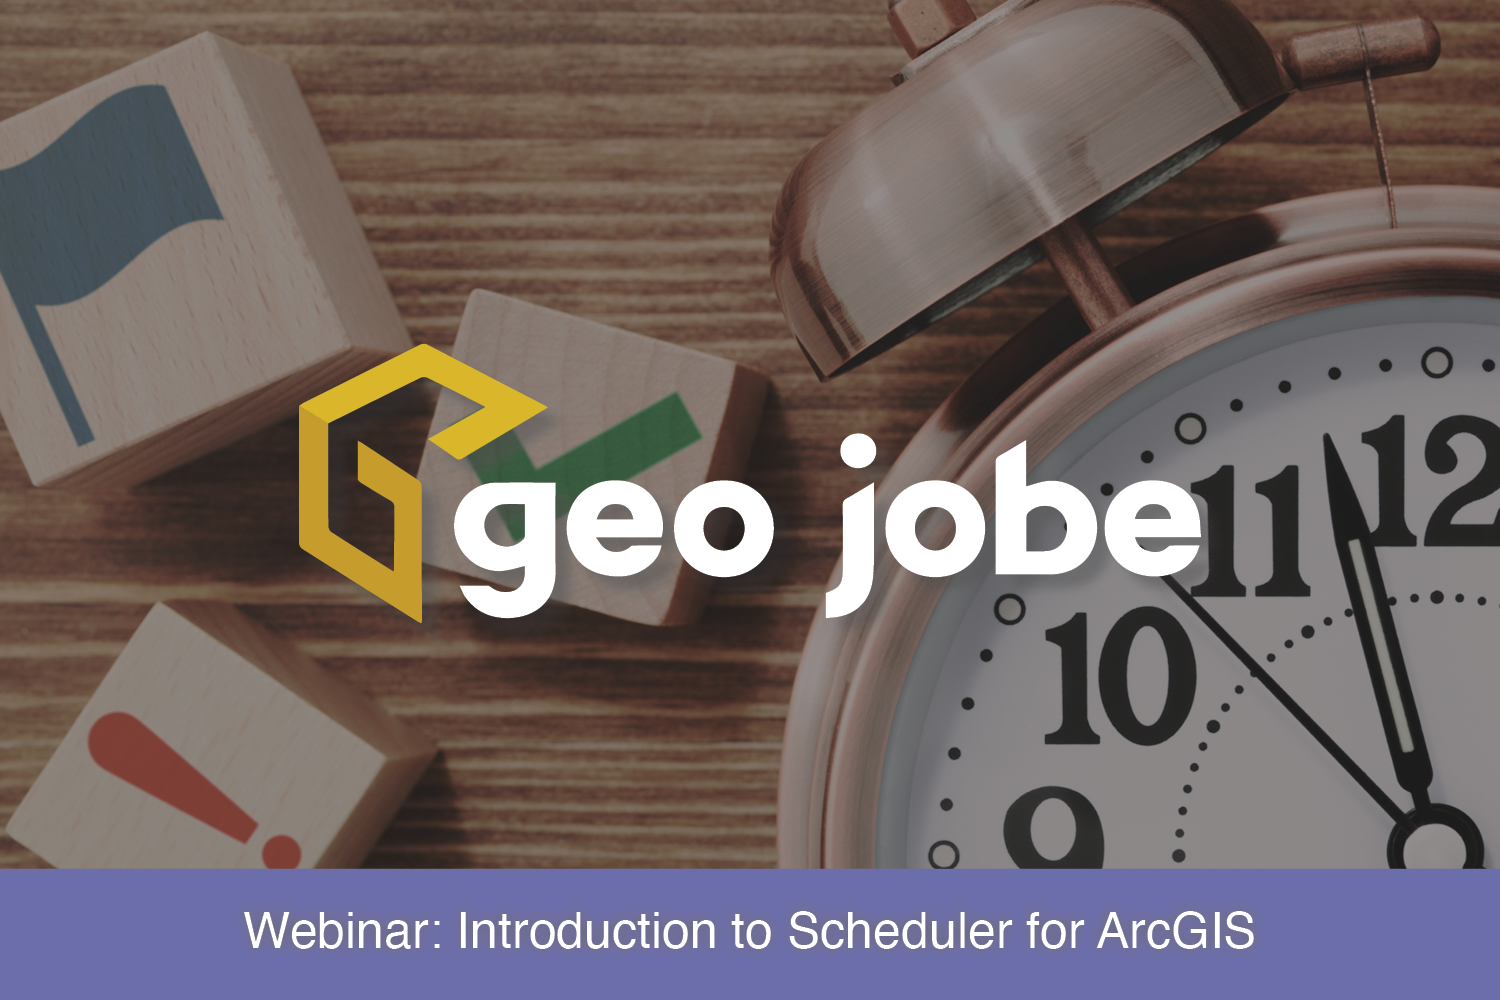 WATCH: Intro to Scheduler for ArcGIS